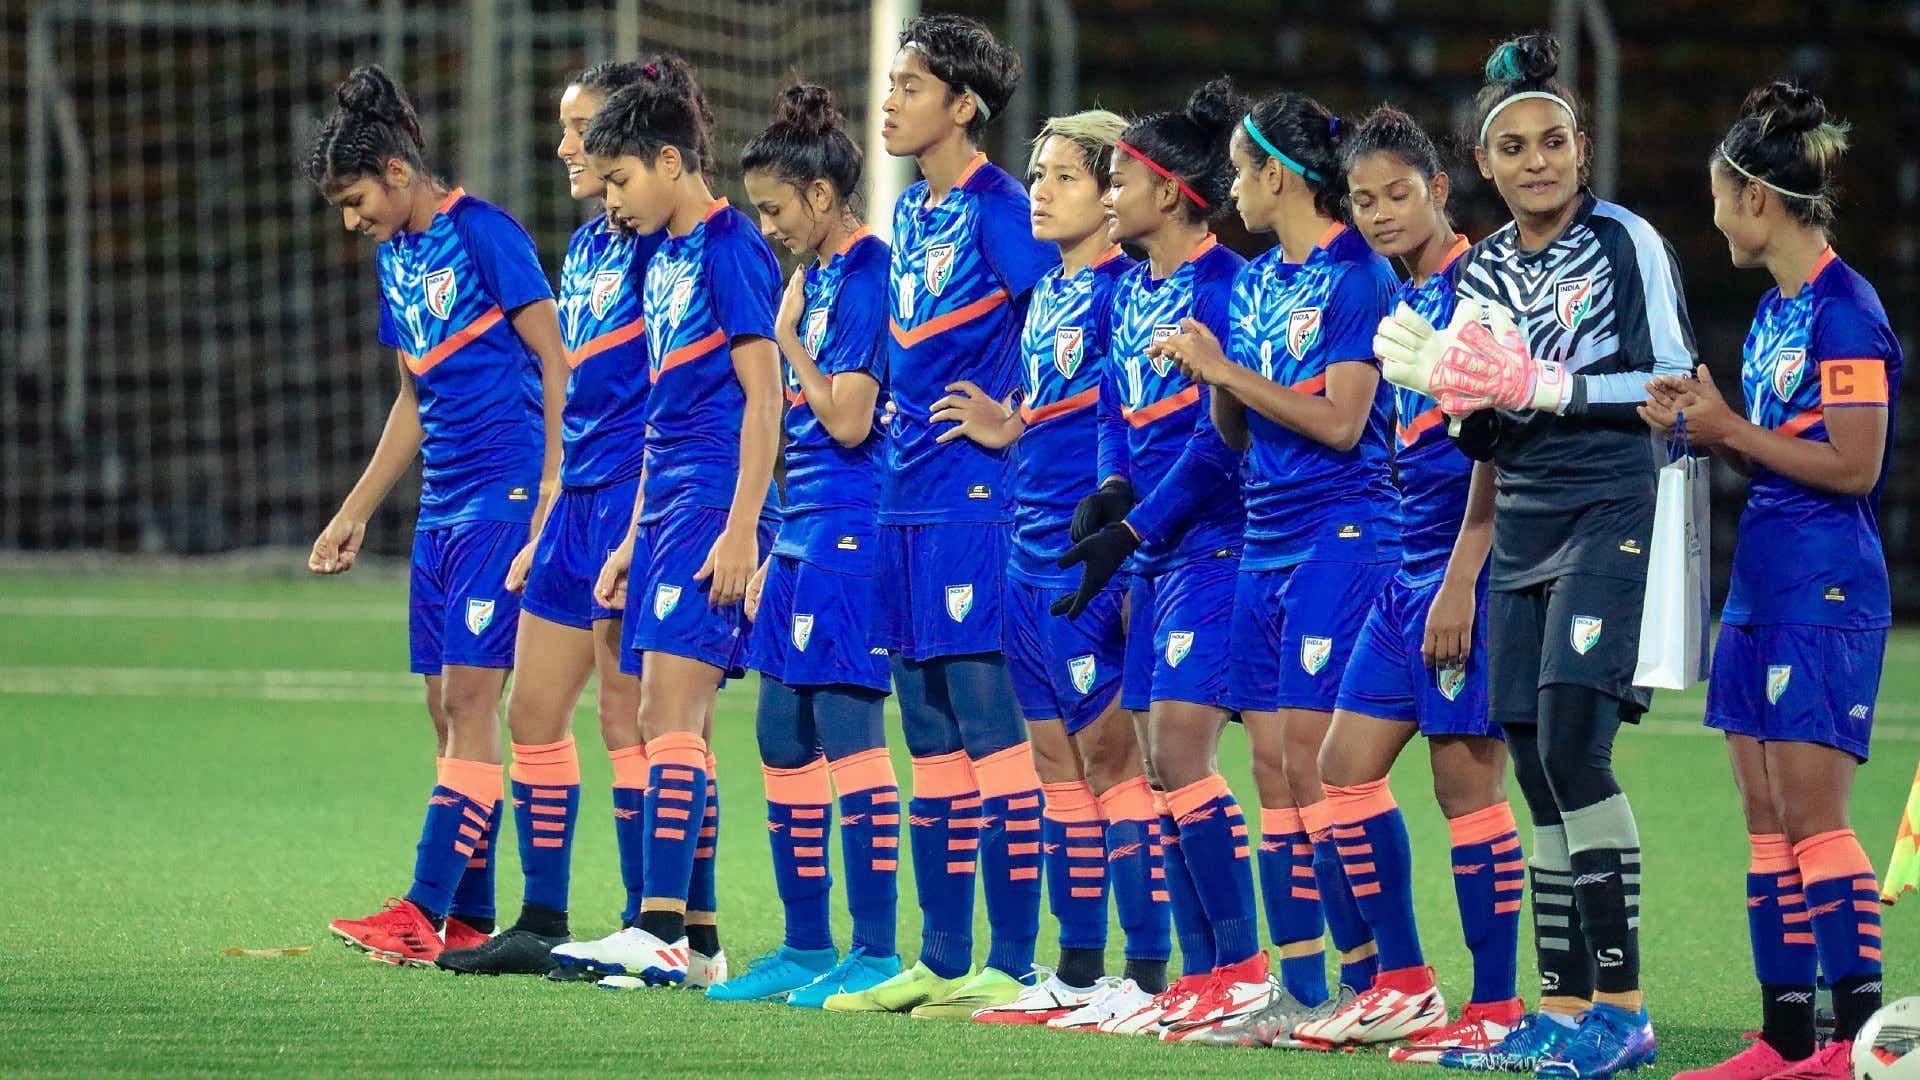 India enter the tournament after a preparatory tour in Brazil. (Image: AIFF)